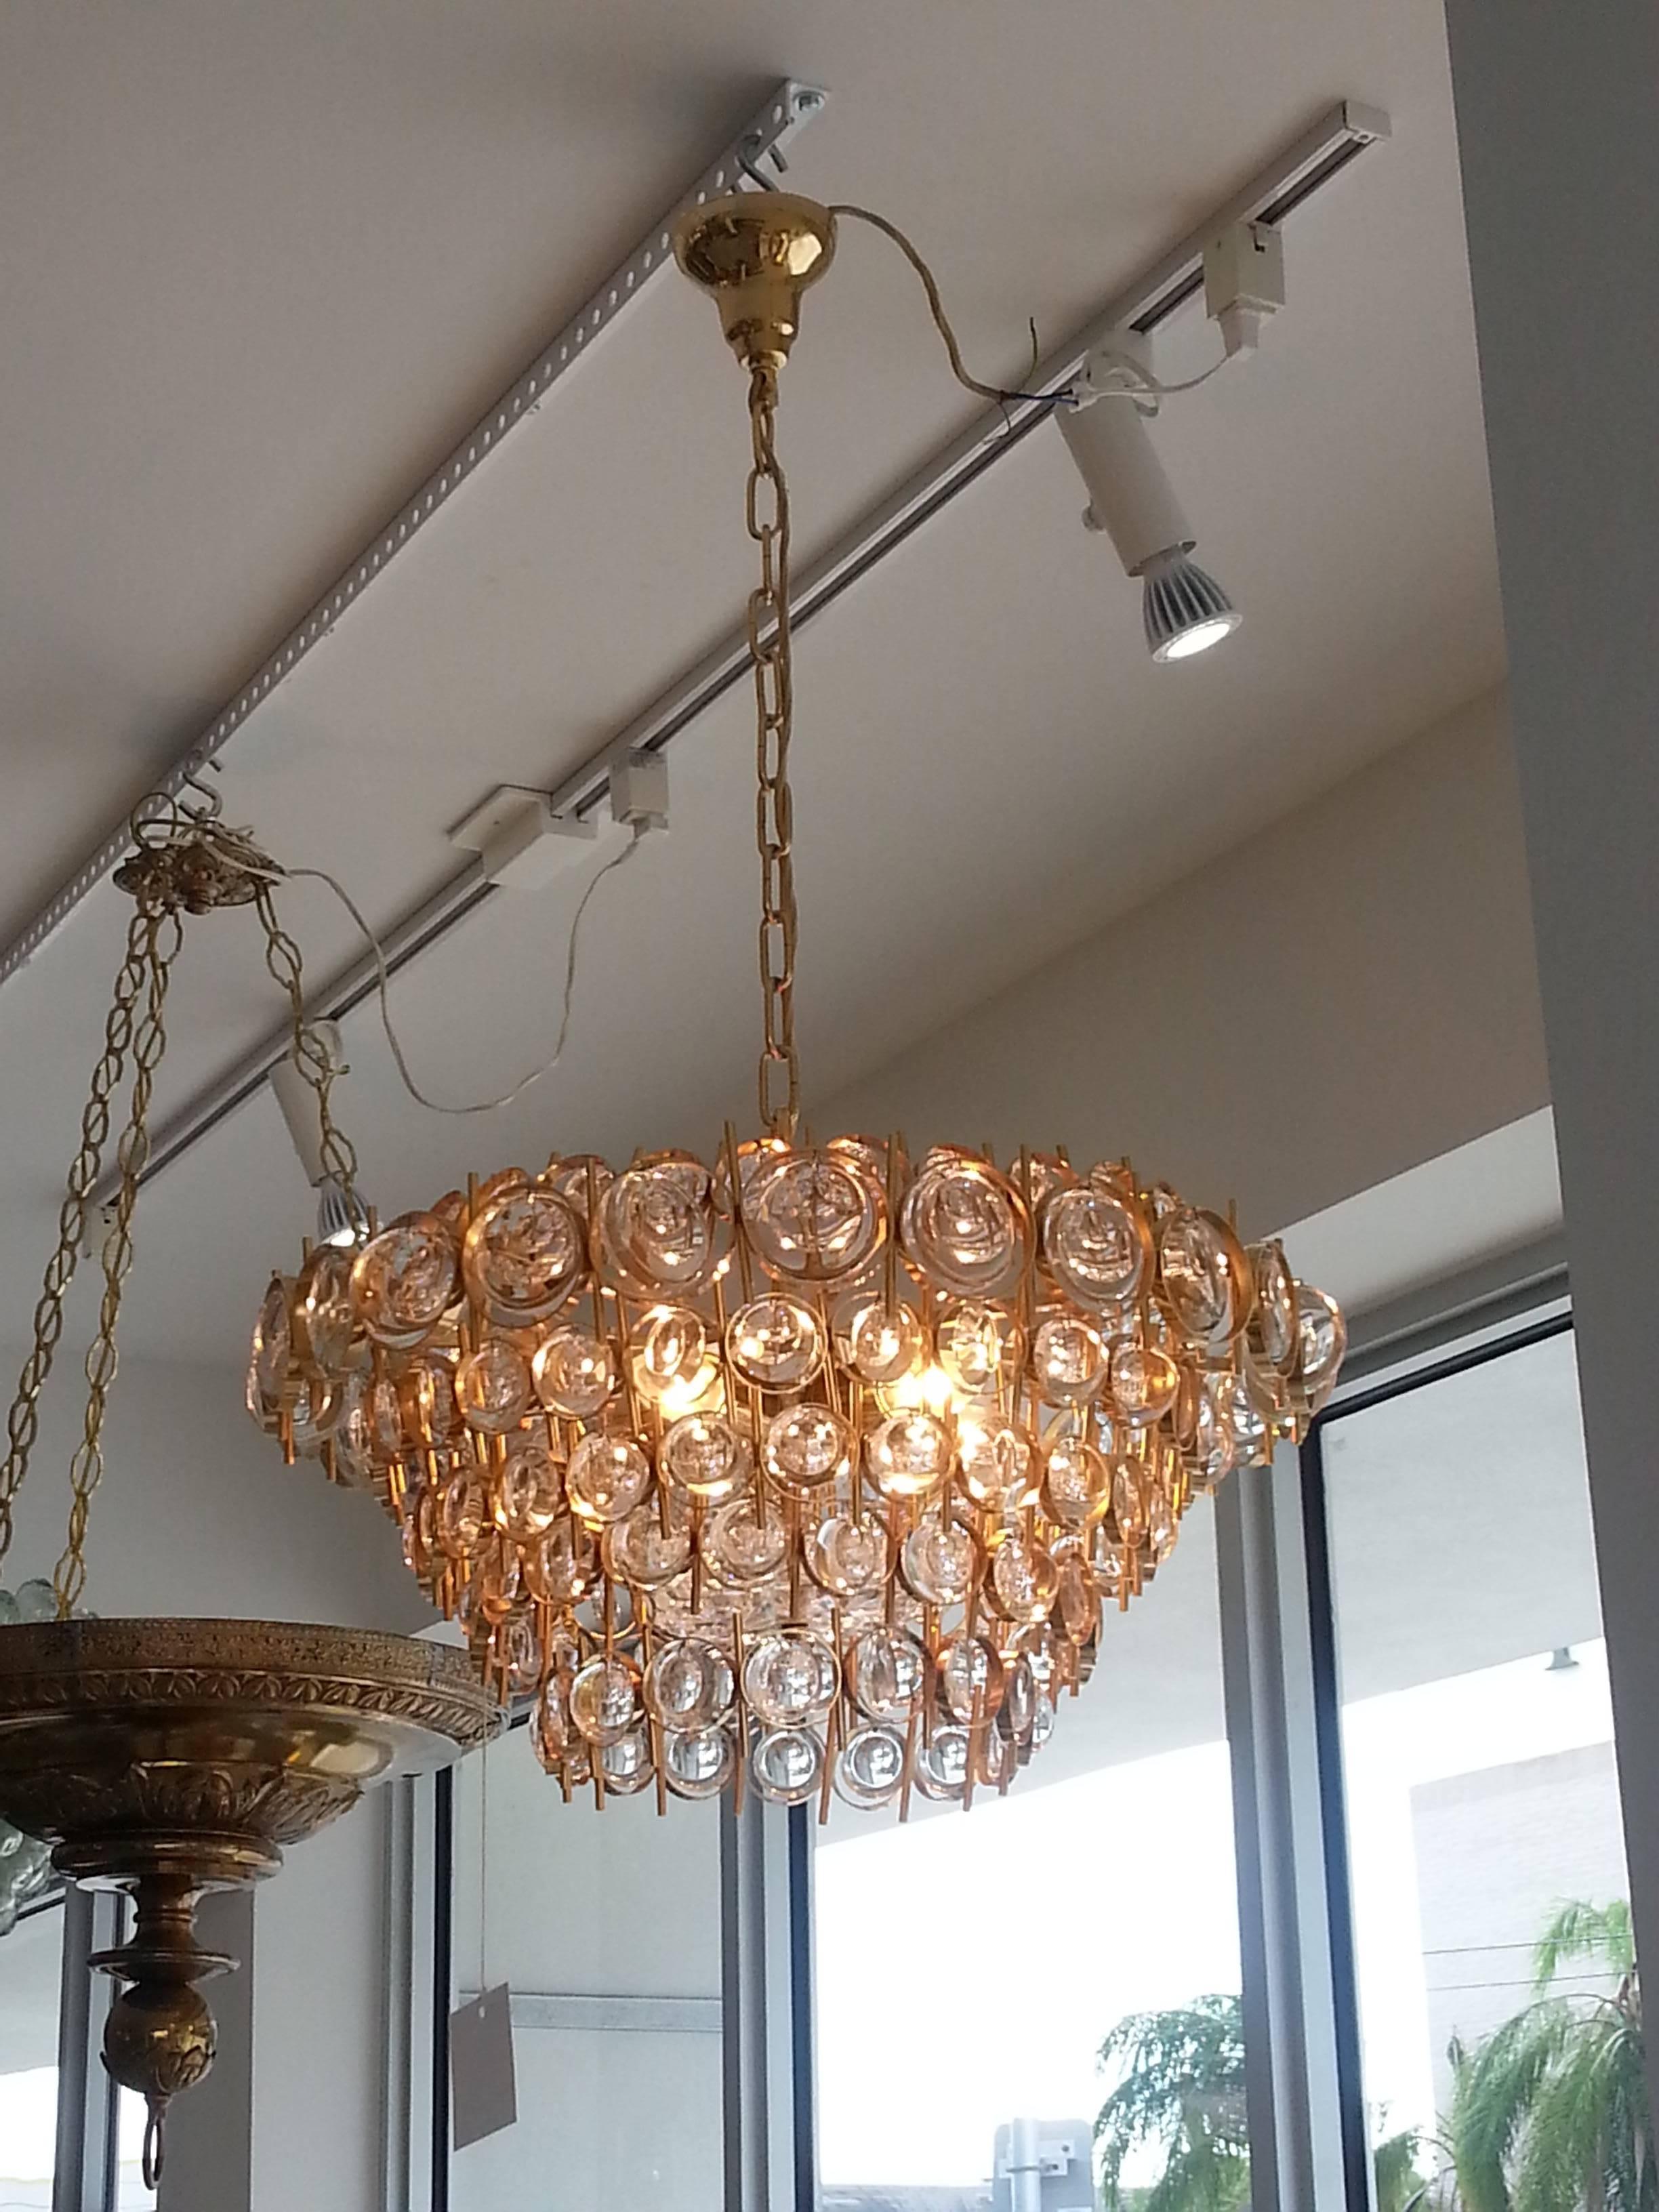 This beautiful chandelier was produced in the 1970s by Palwa of Germany, a firm known for its "Jewel Crystals".

The piece epitomizes modern glamour with its 24-karat gold-plated finish and its 140 optic- discs that sparkle and glisten